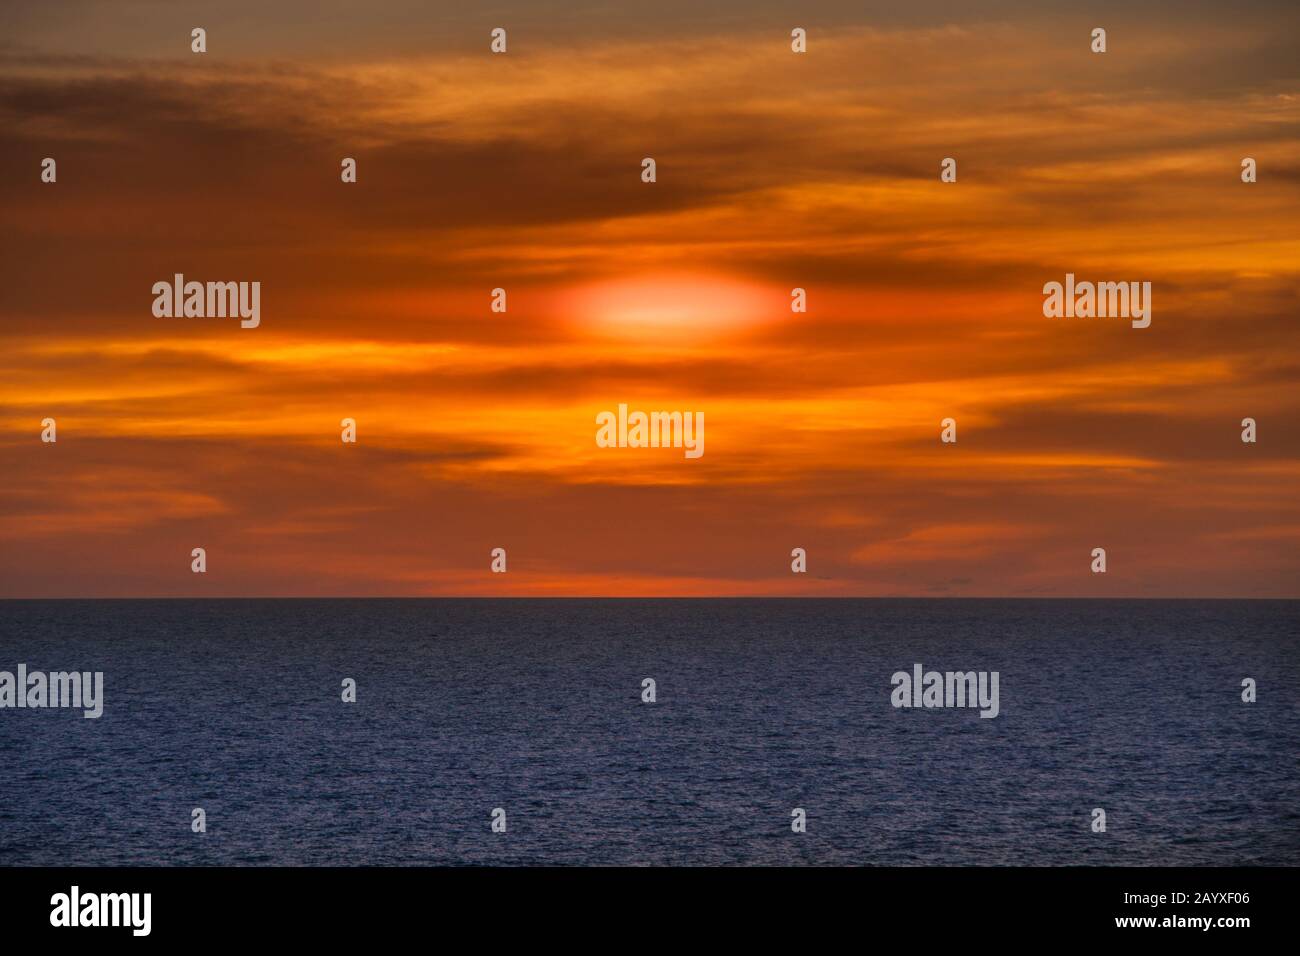 Timor Sea, Australai - December 1, 2009: Red sunset with brown cloudscape over dark blue sea. Stock Photo